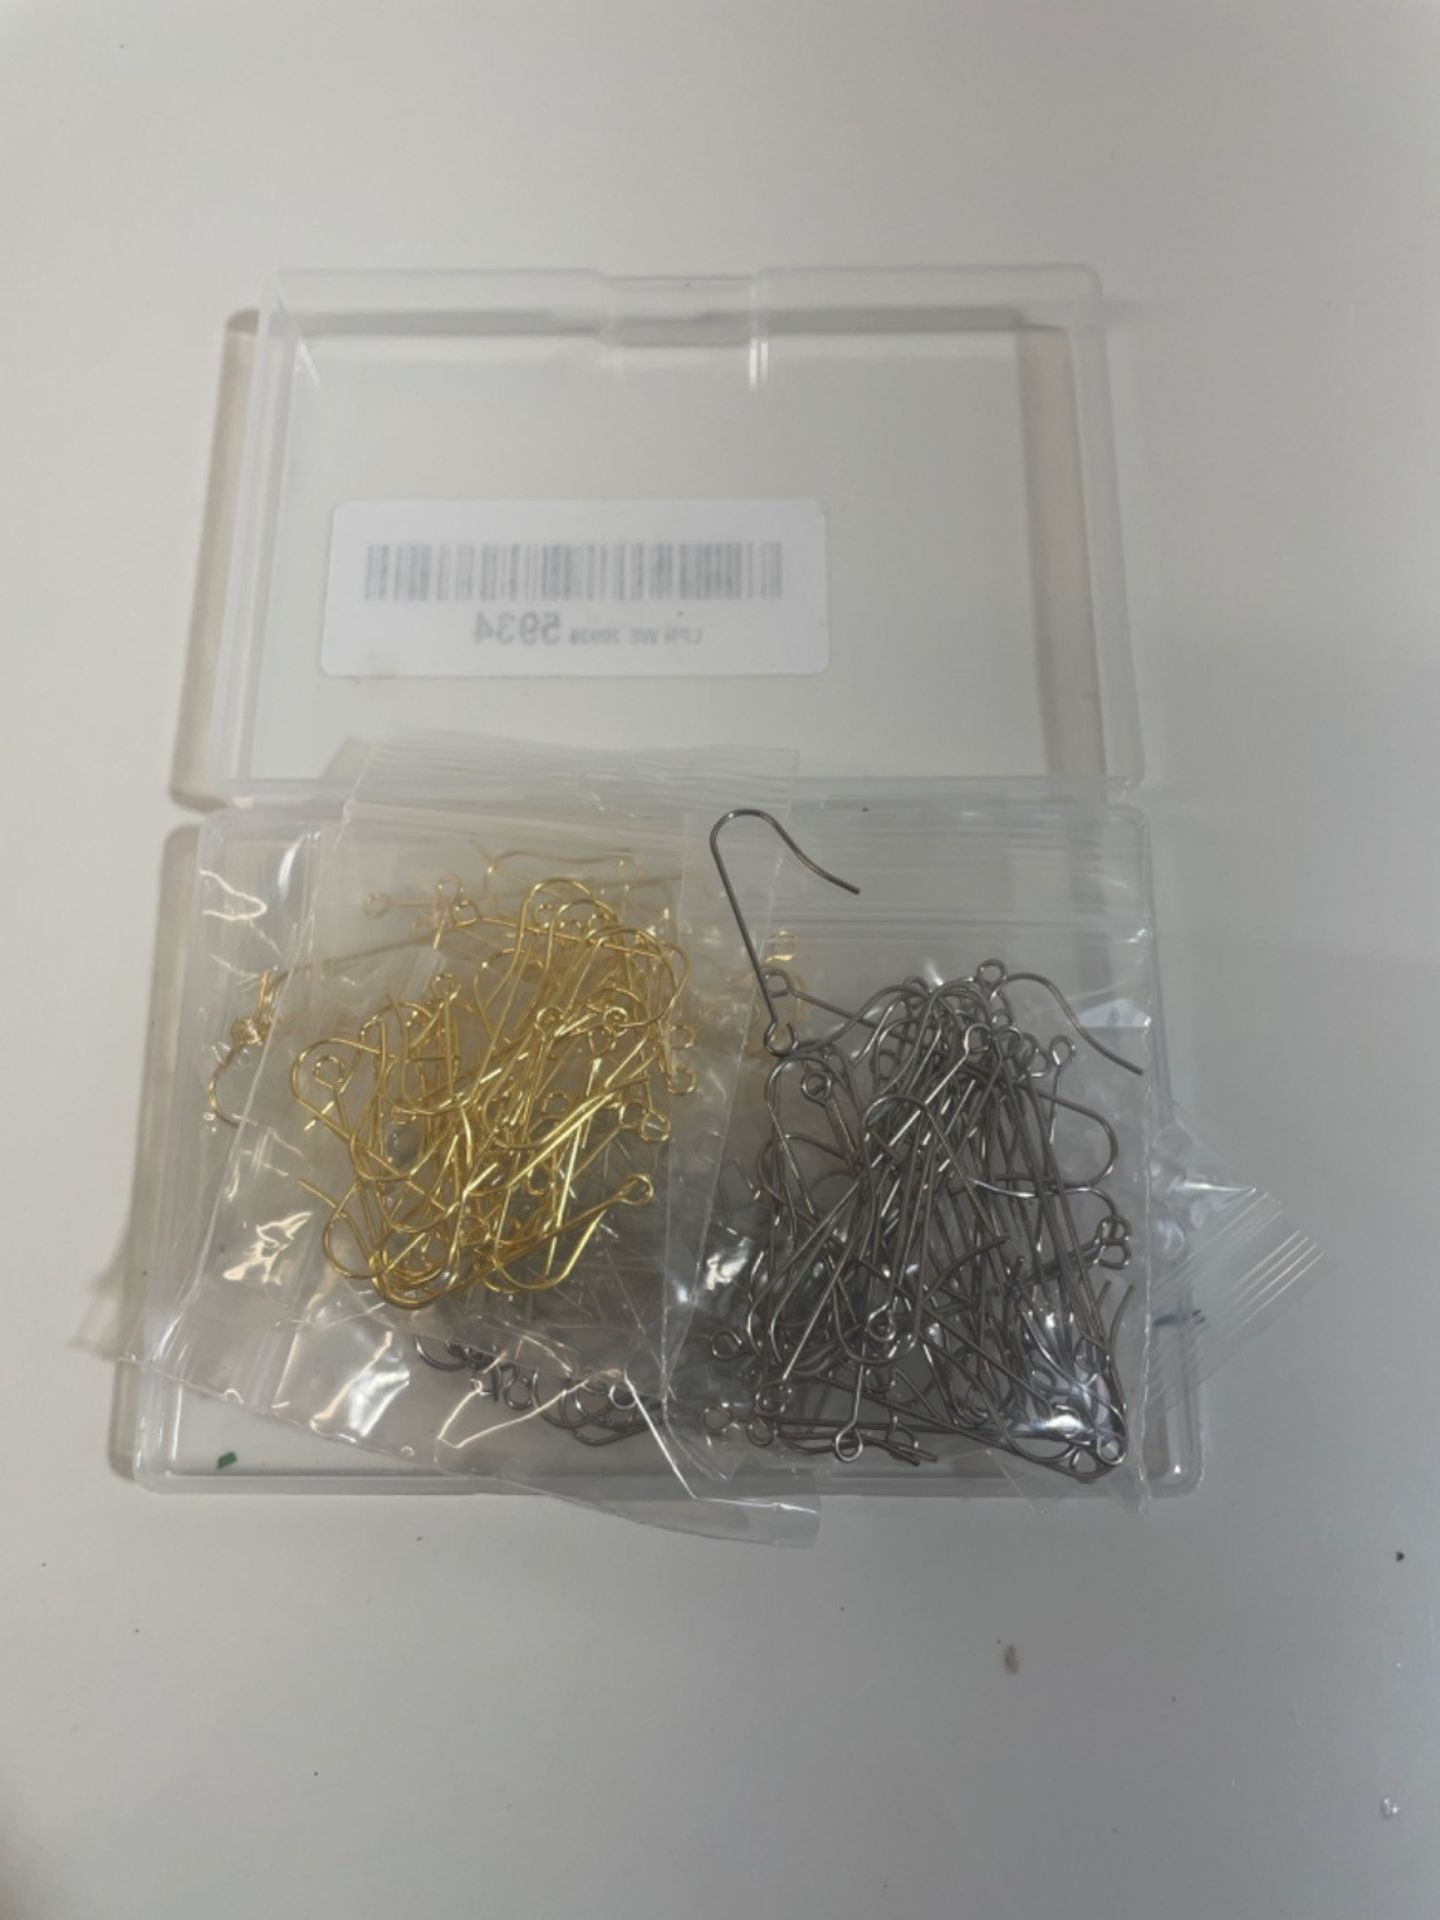 DICOSMETIC 160Pcs 2 Colors 2 Sizes Earring Making Kit Stainless Steel Earring Hooks 28/40mm Long Ea - Image 2 of 2